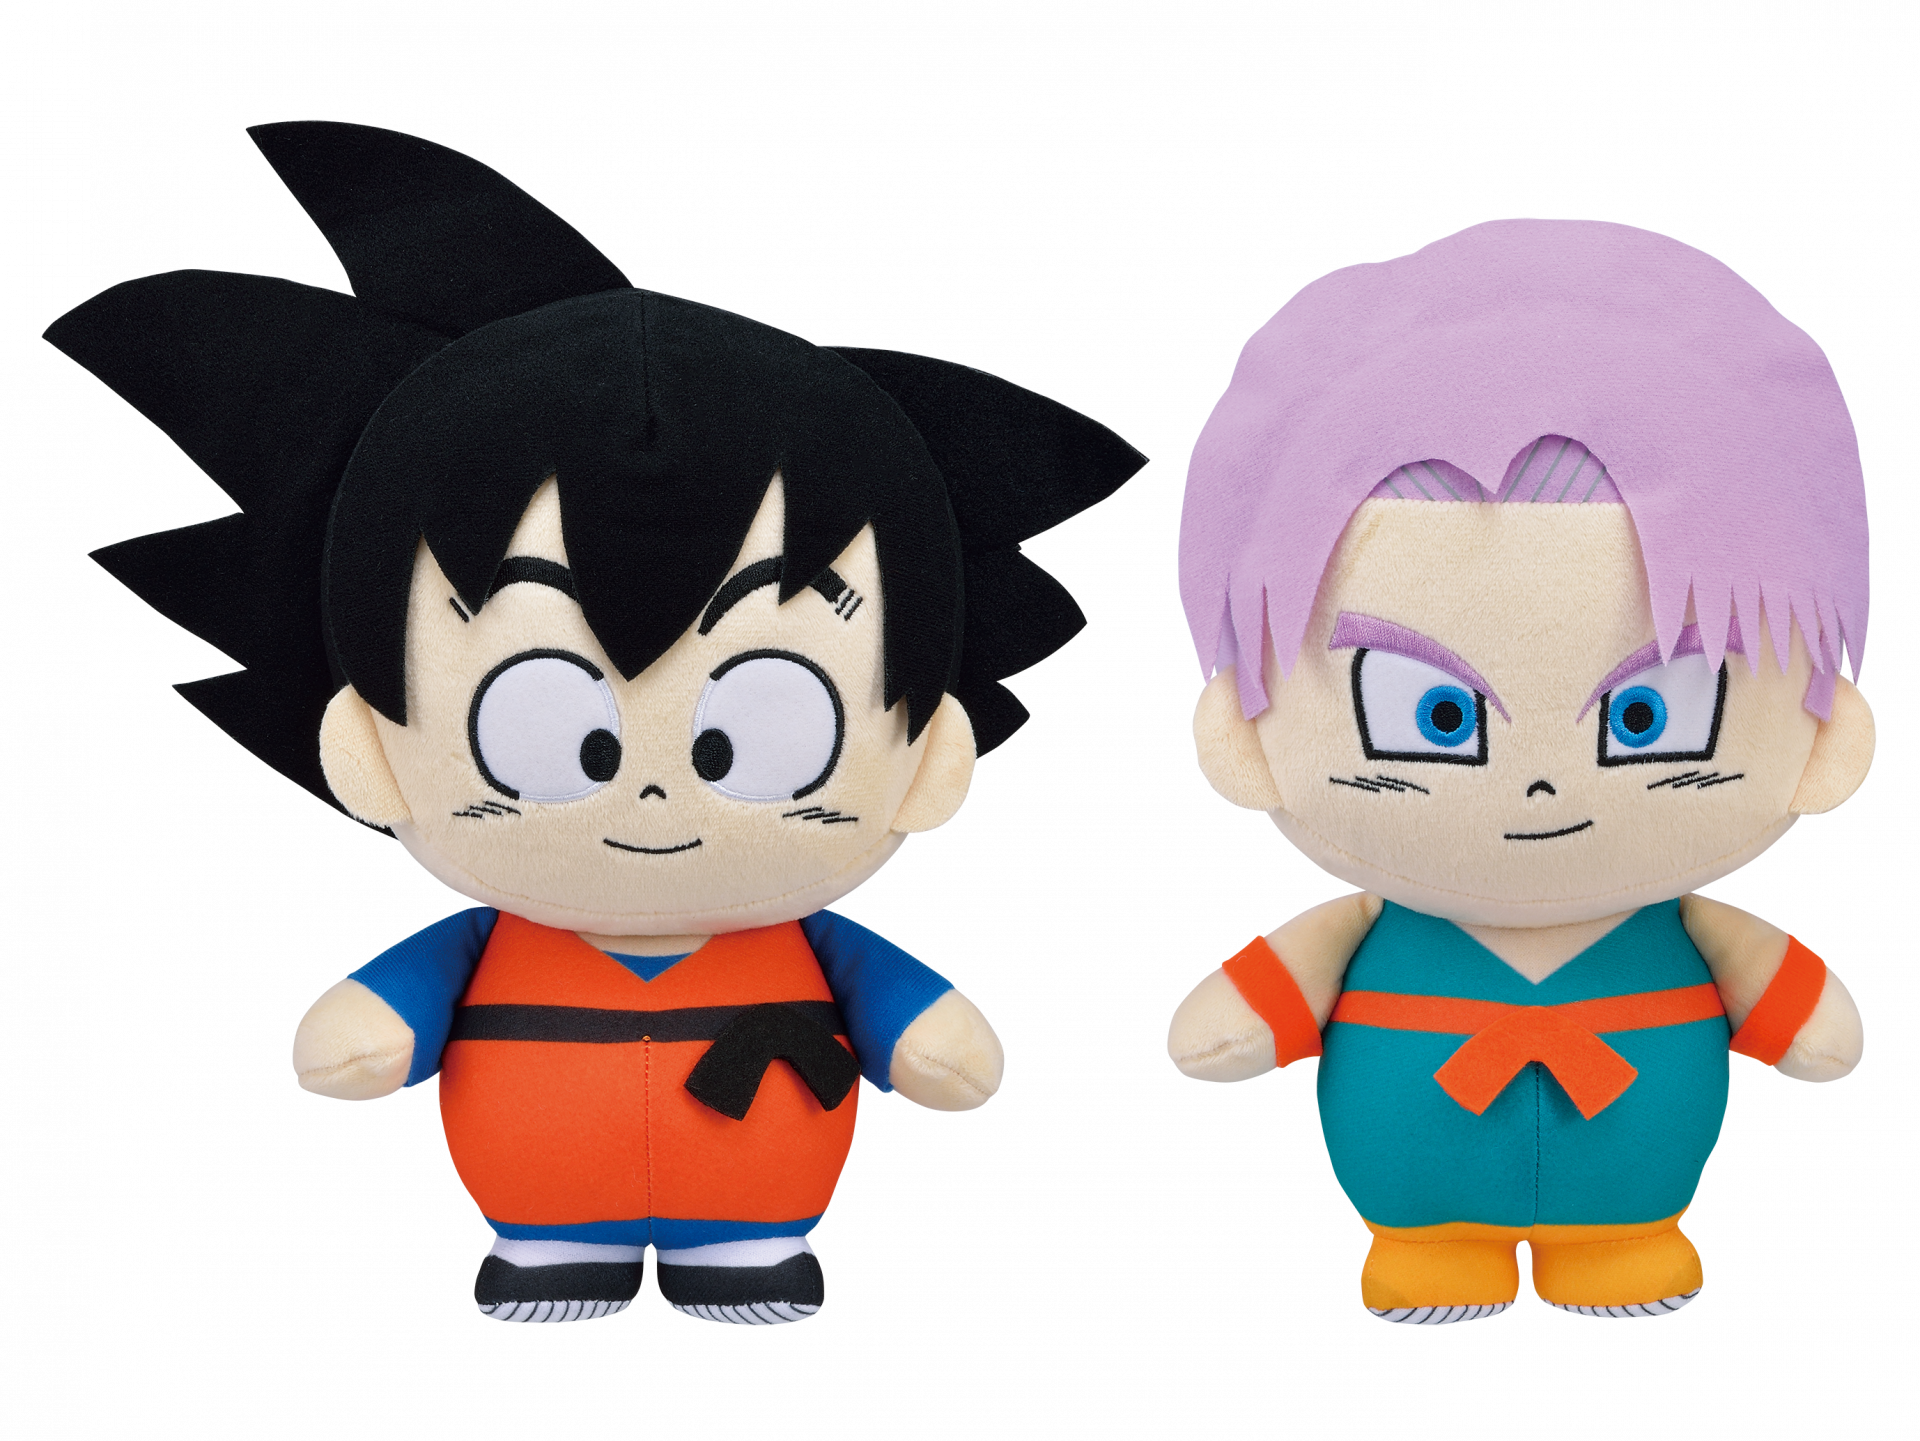 New Goten and Trunks Plushies Are Coming to Crane Games!